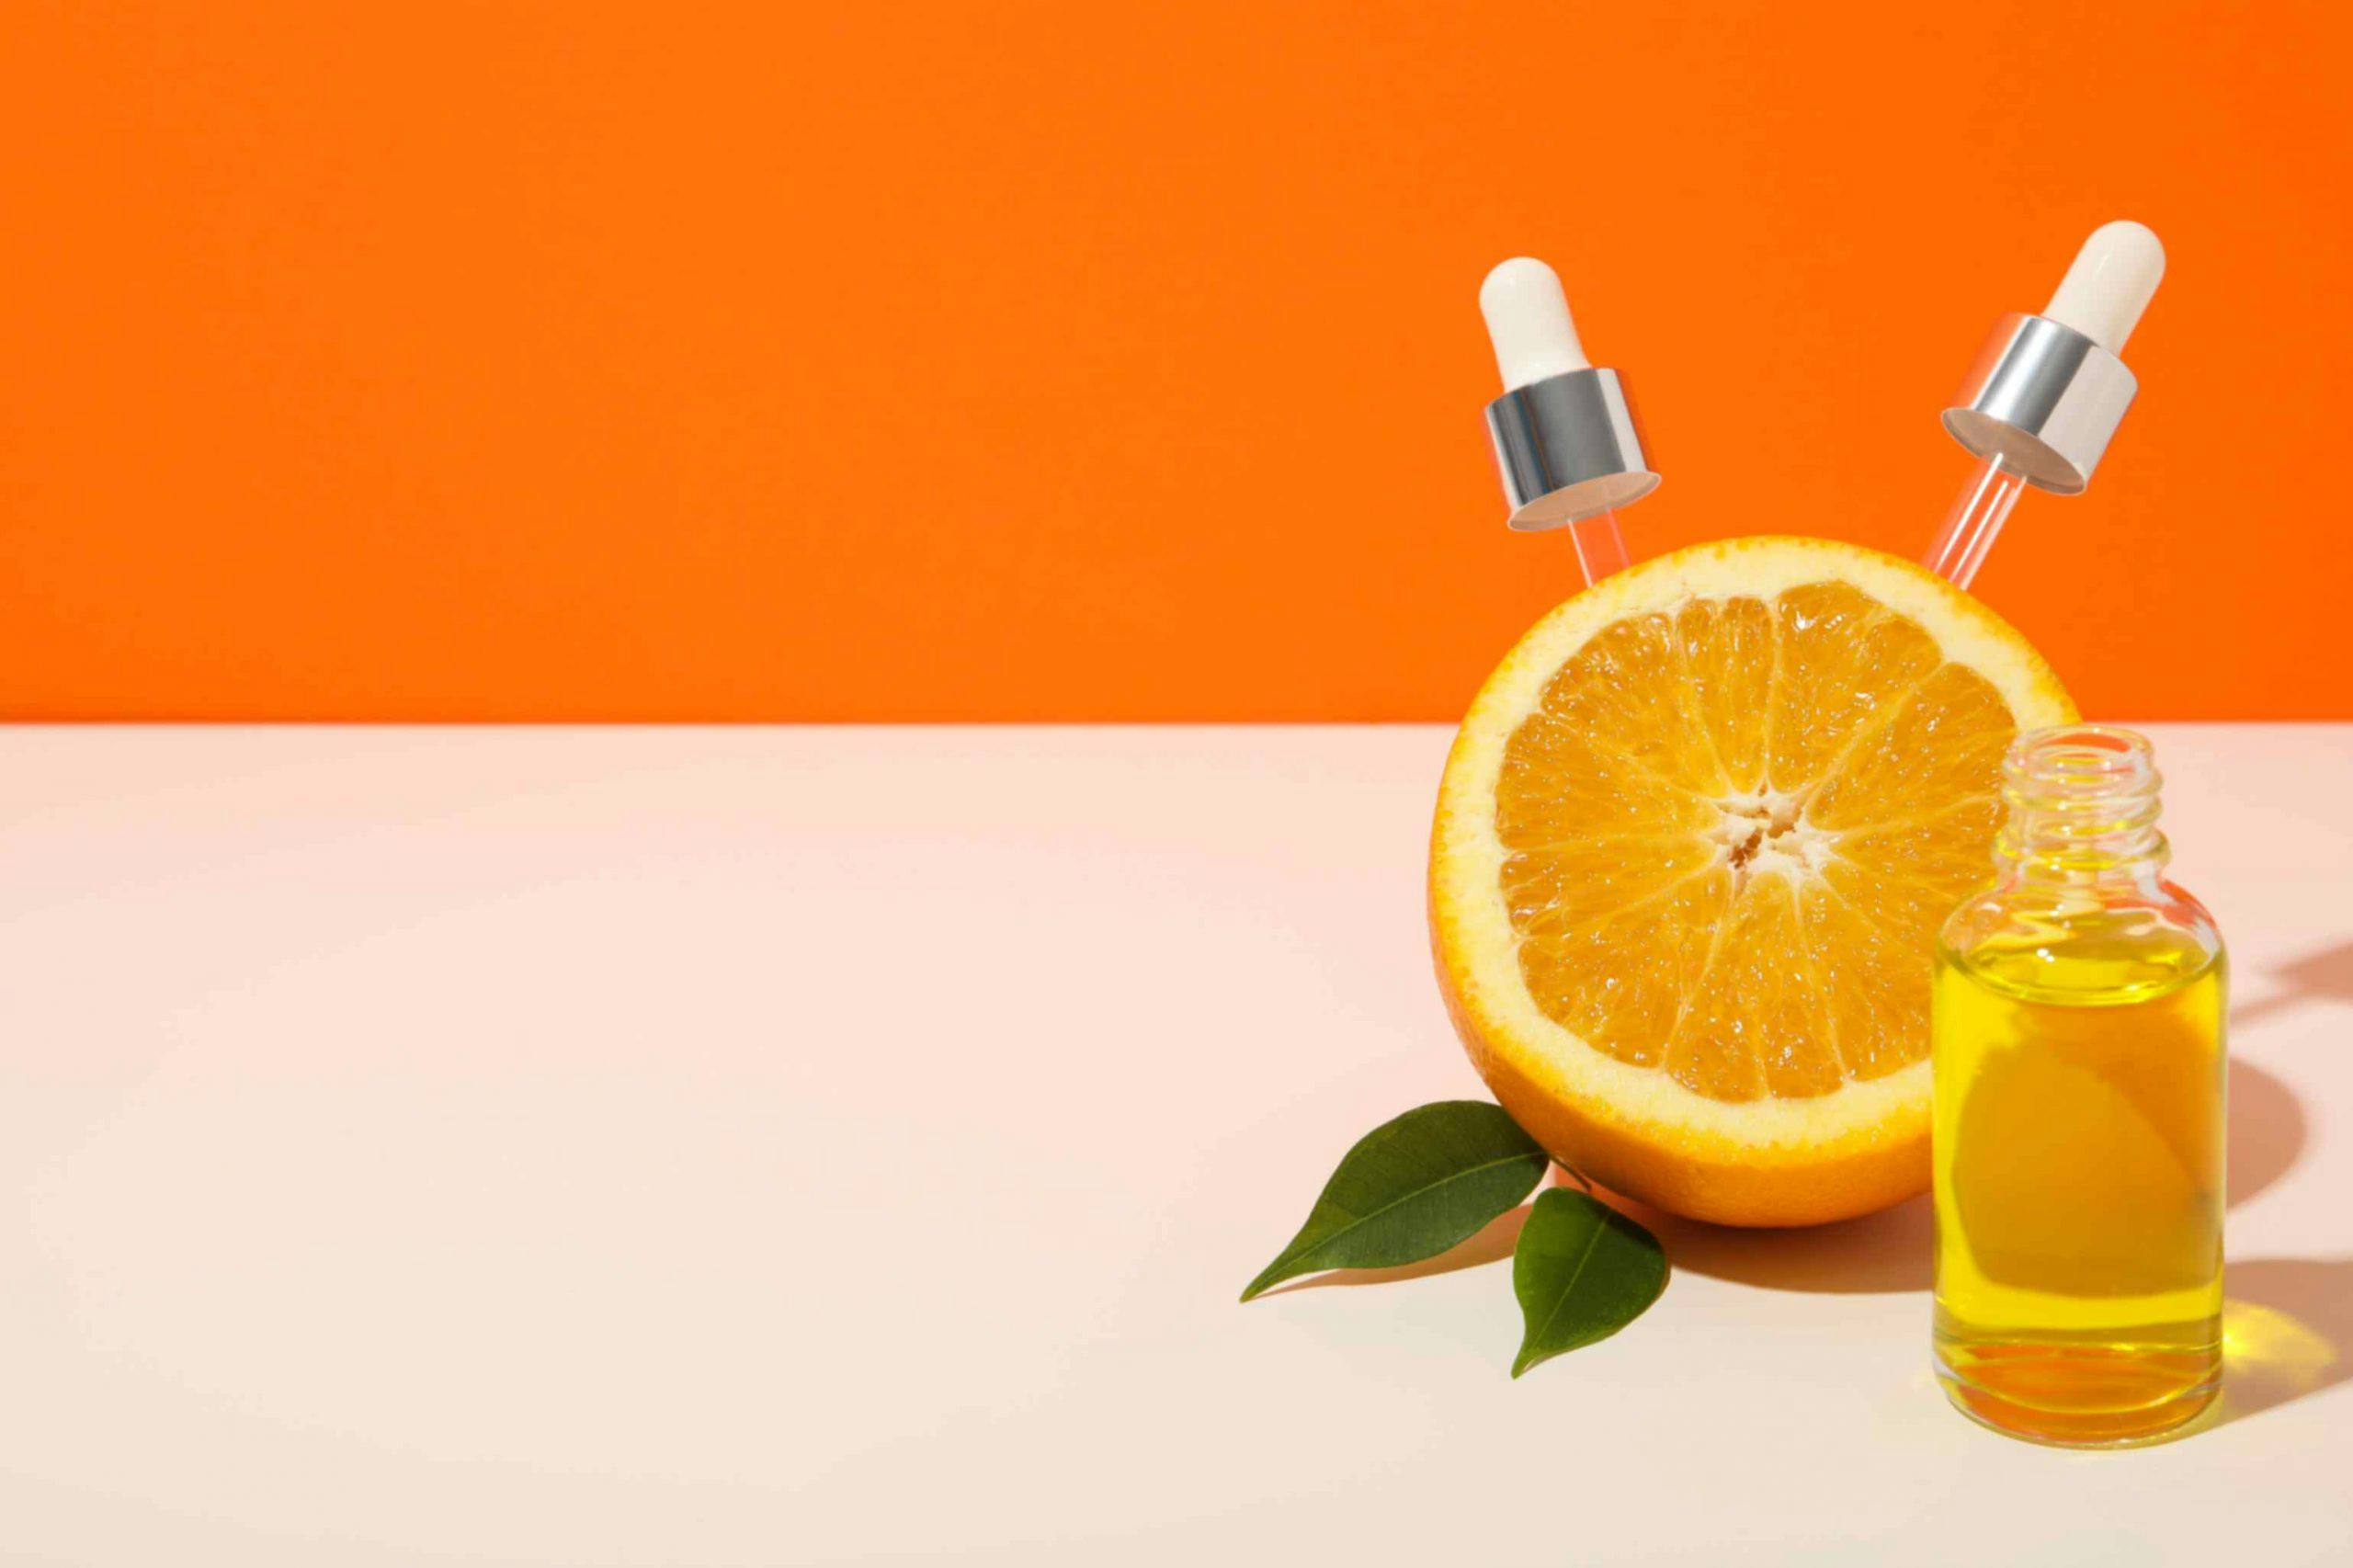 Can You Use Niacinamide and Vitamin C Together?